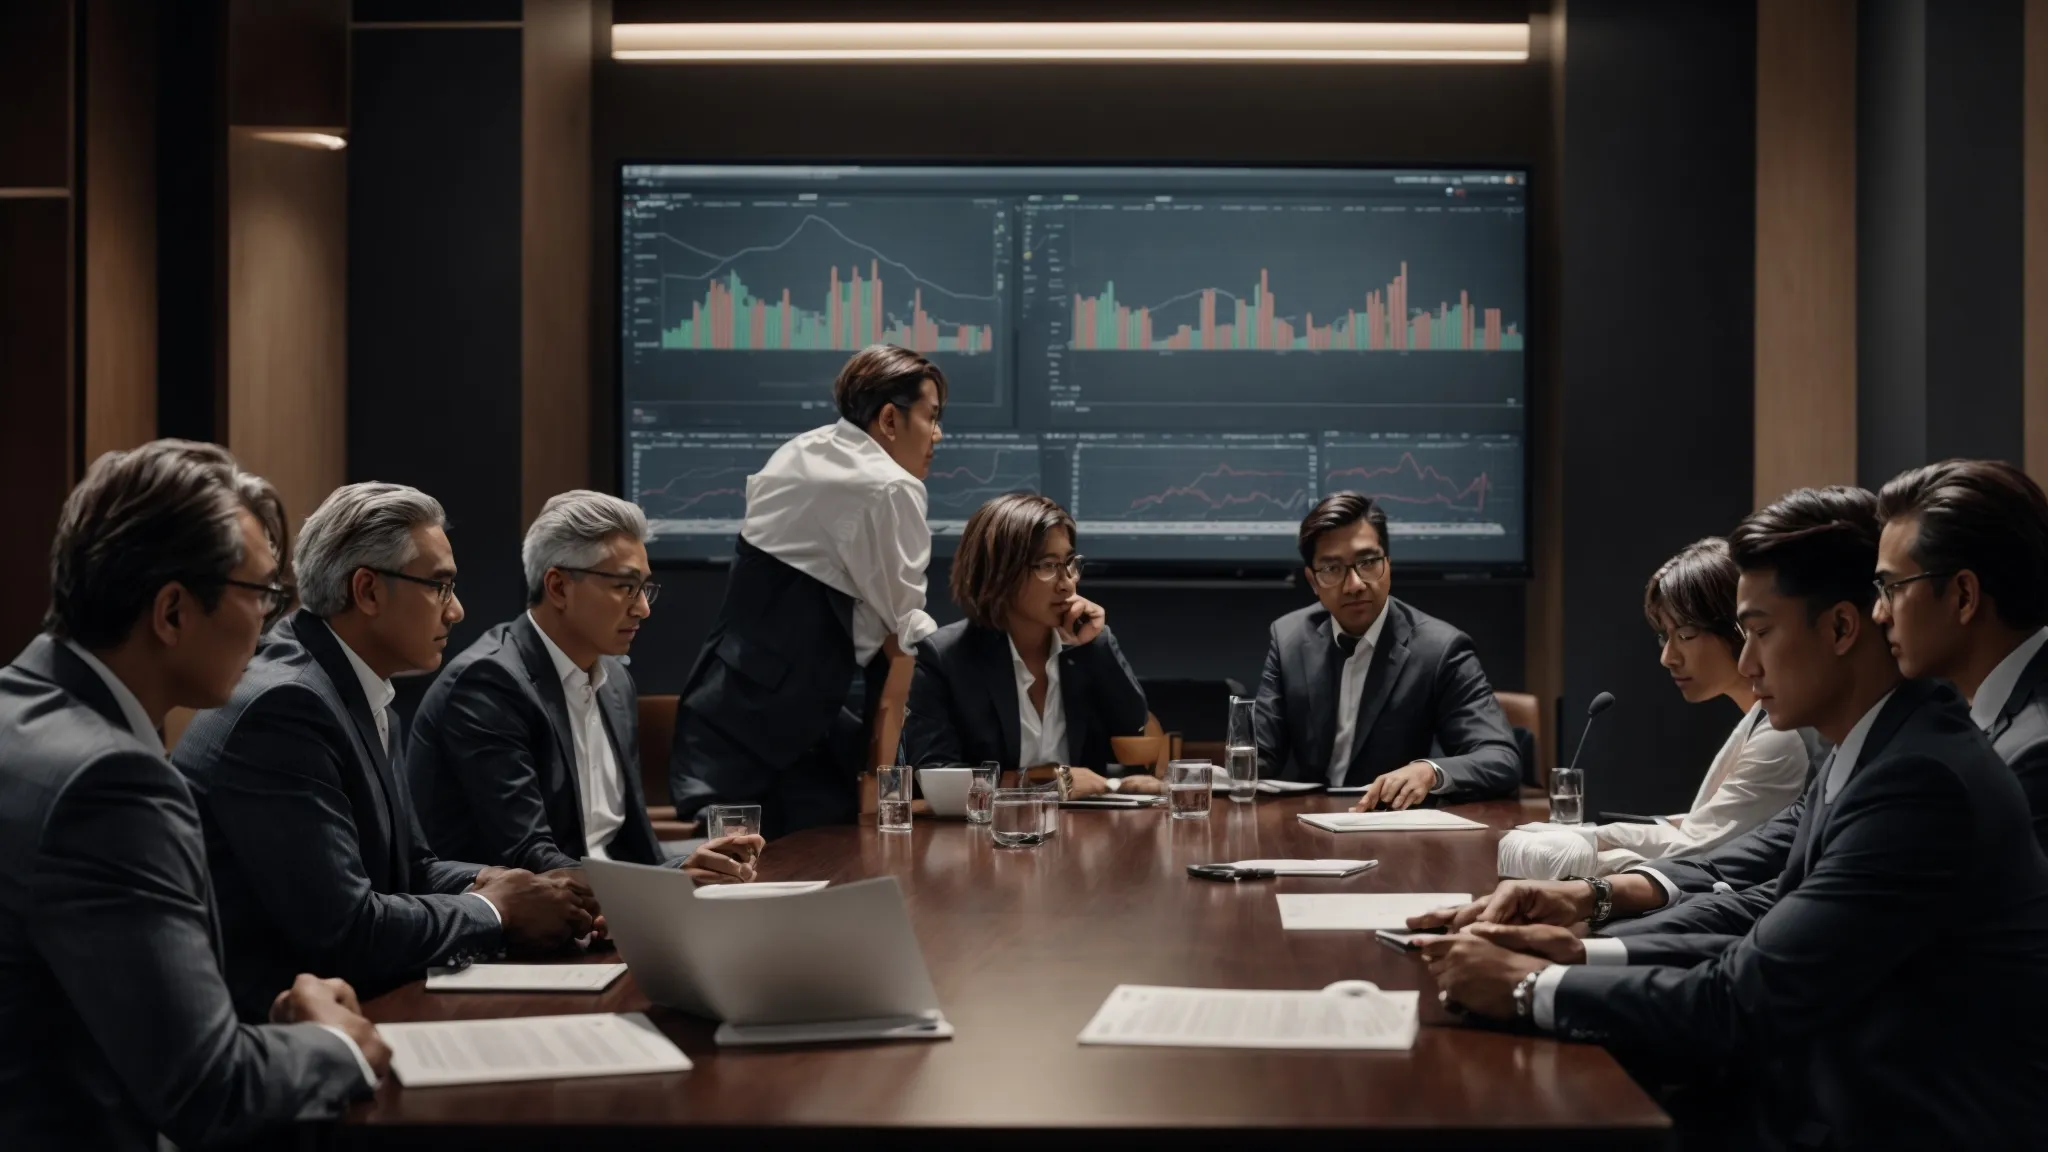 a group of professionals gathers around a conference table, intently discussing charts and strategies displayed on a large screen.